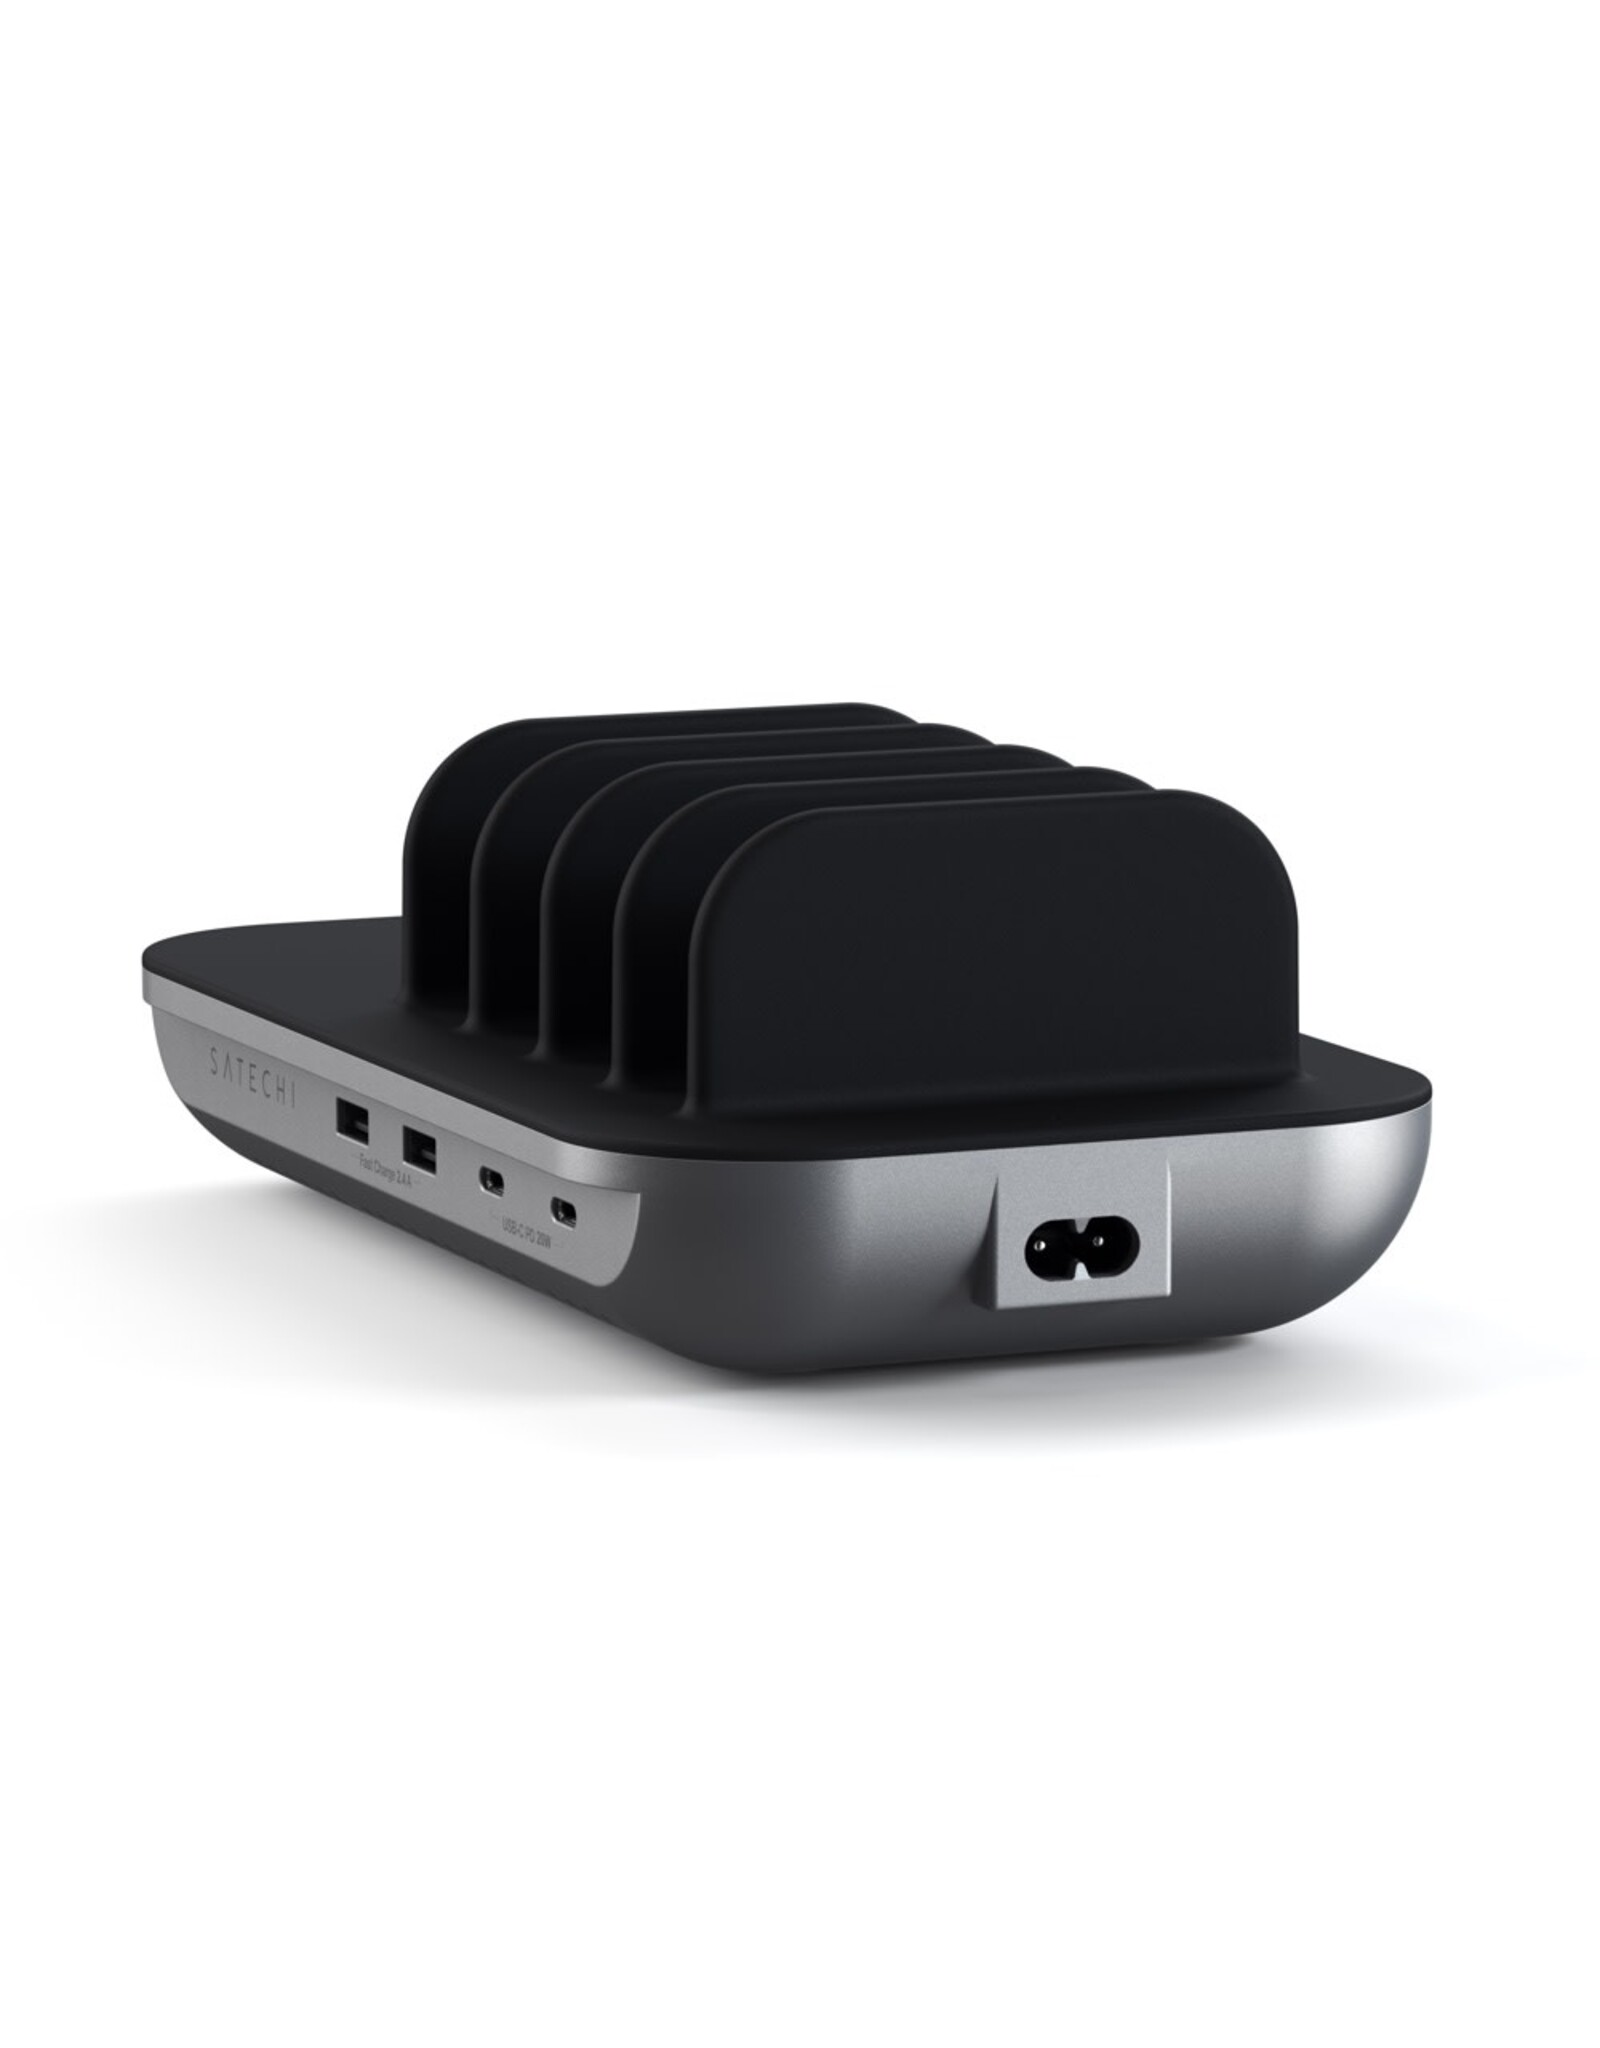 Satechi Satechi Dock5 Multi-Device Charging Station with Wireless Charging